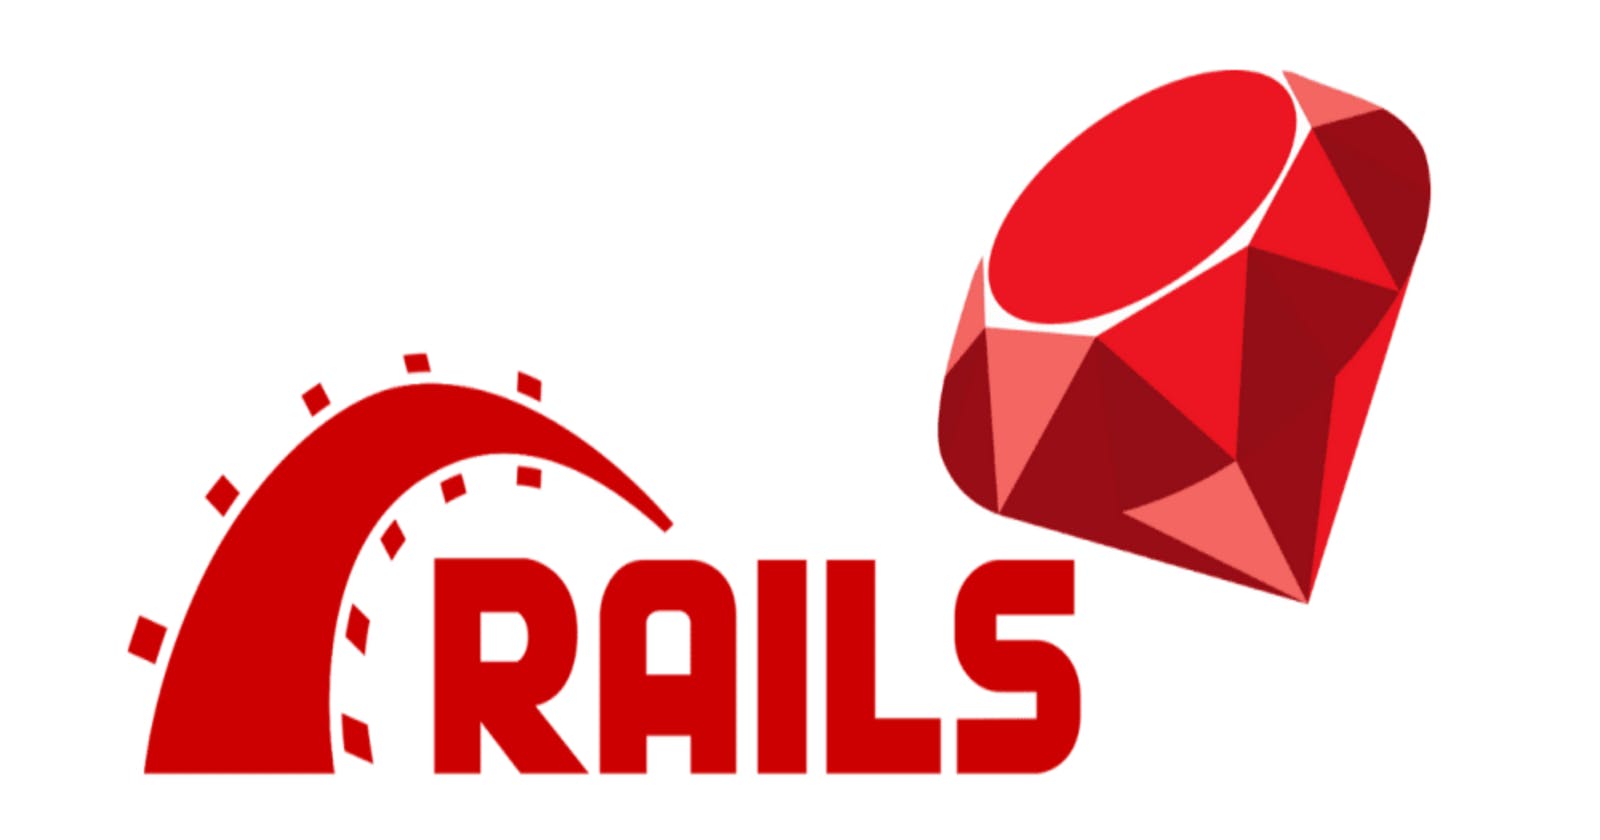 Creating a simple To-Do app using Rails